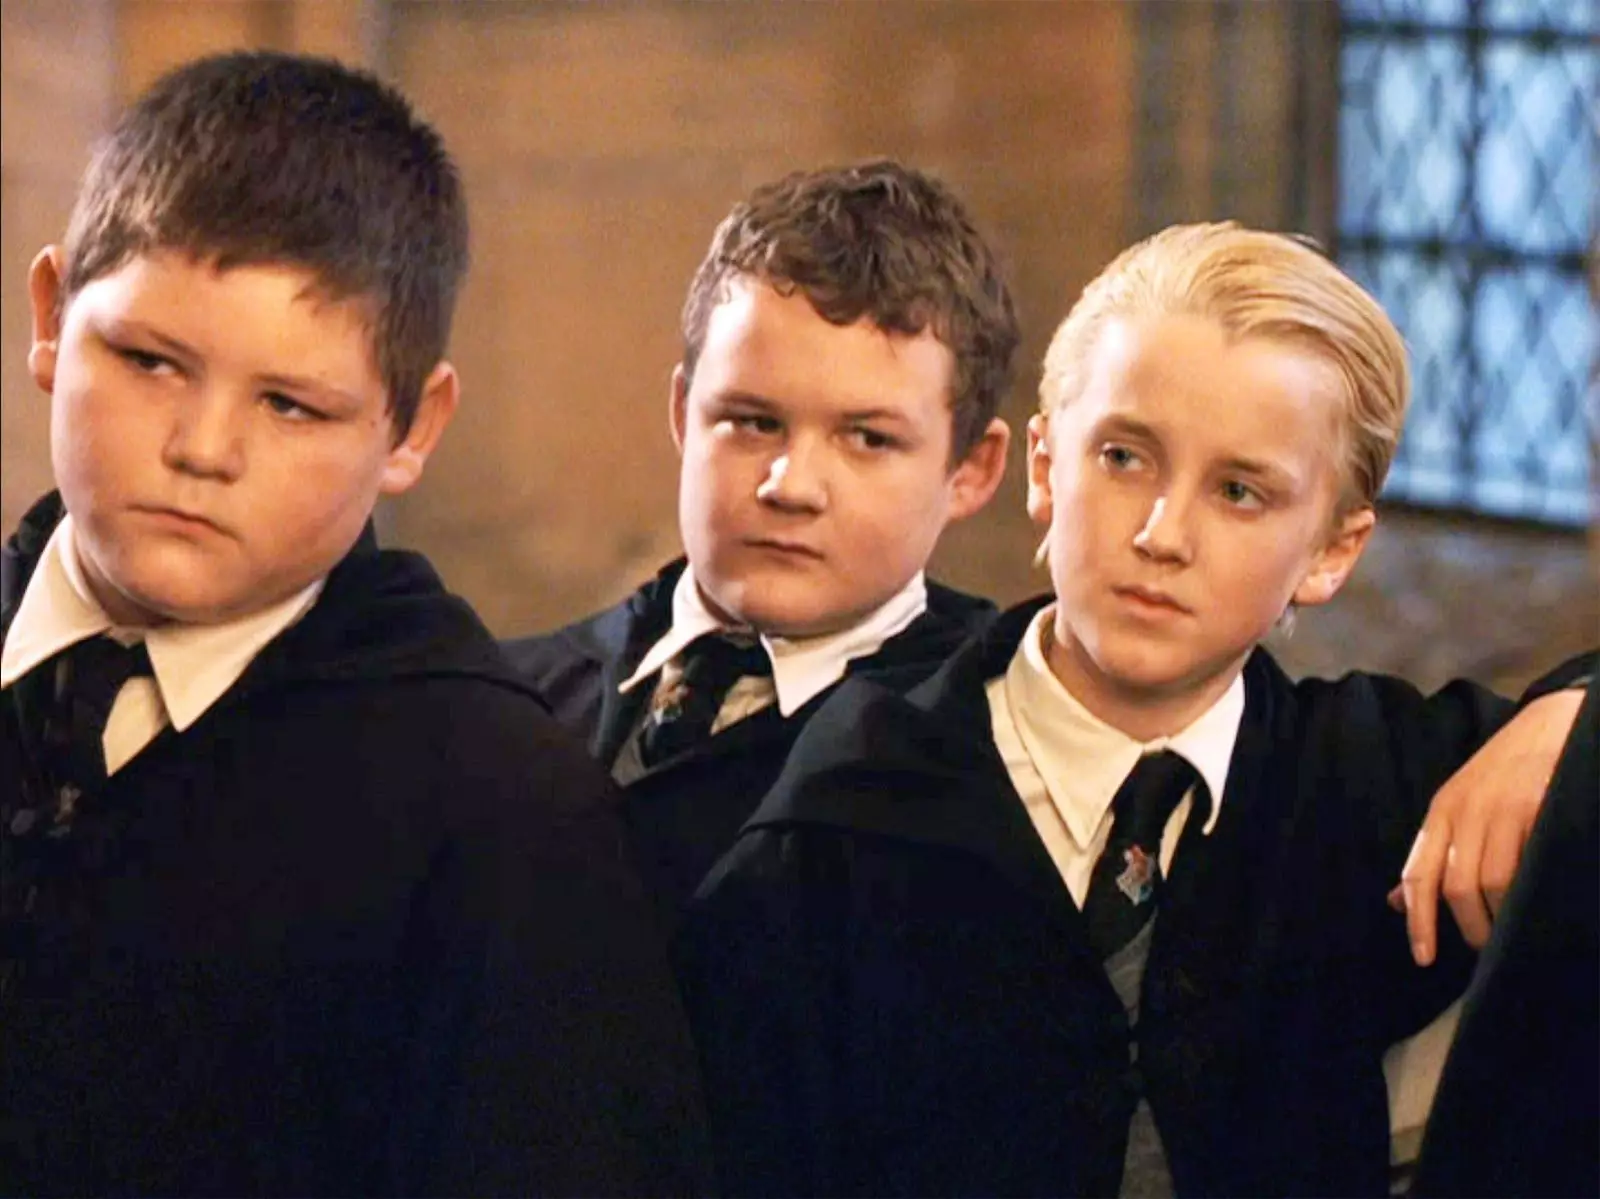 Malfoy and co were members of Slytherin. (